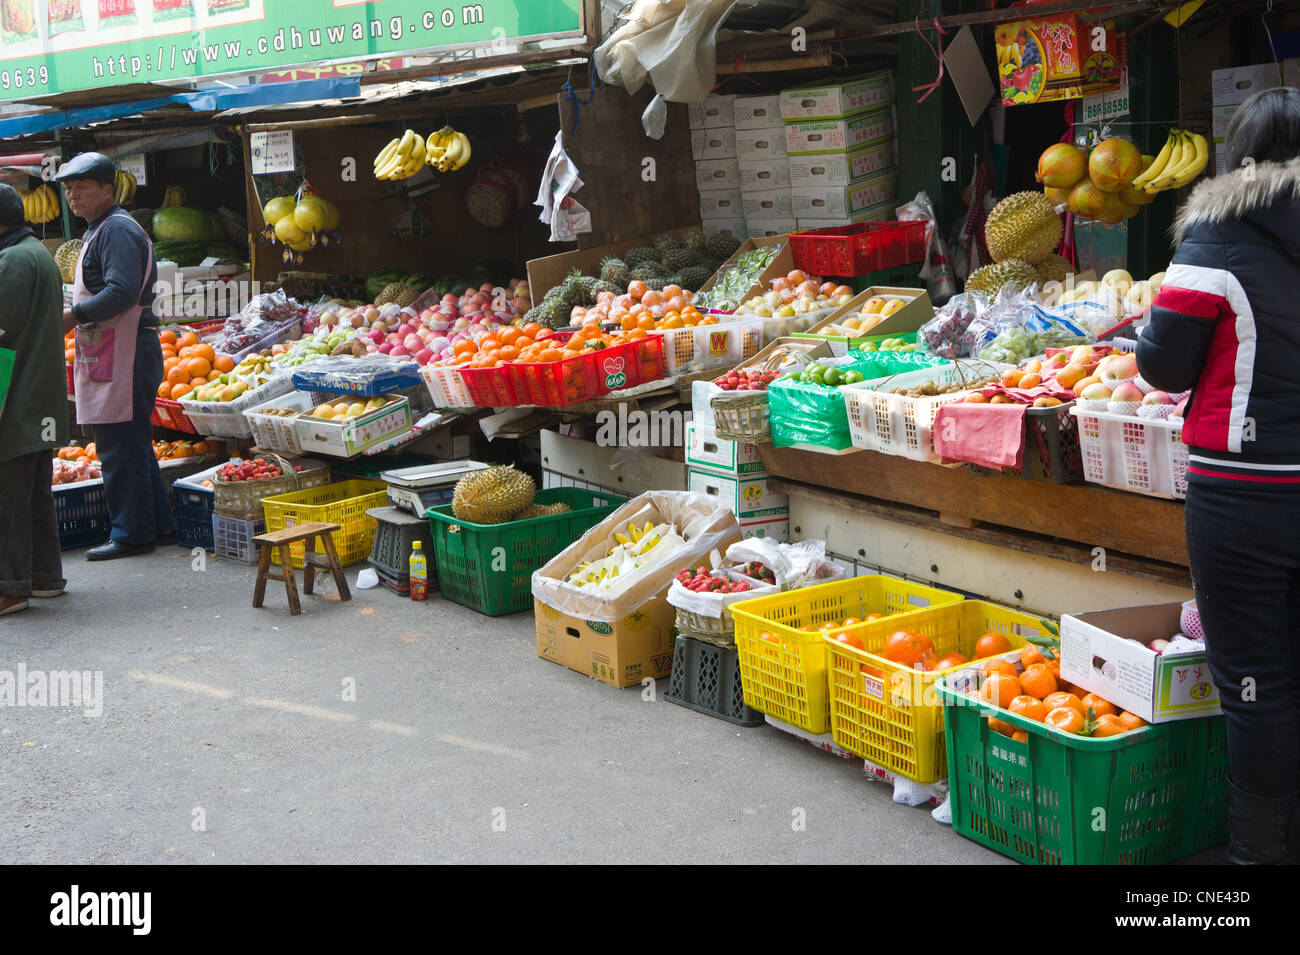 Fruit for sale at a market in Chengdu, China Stock Photo